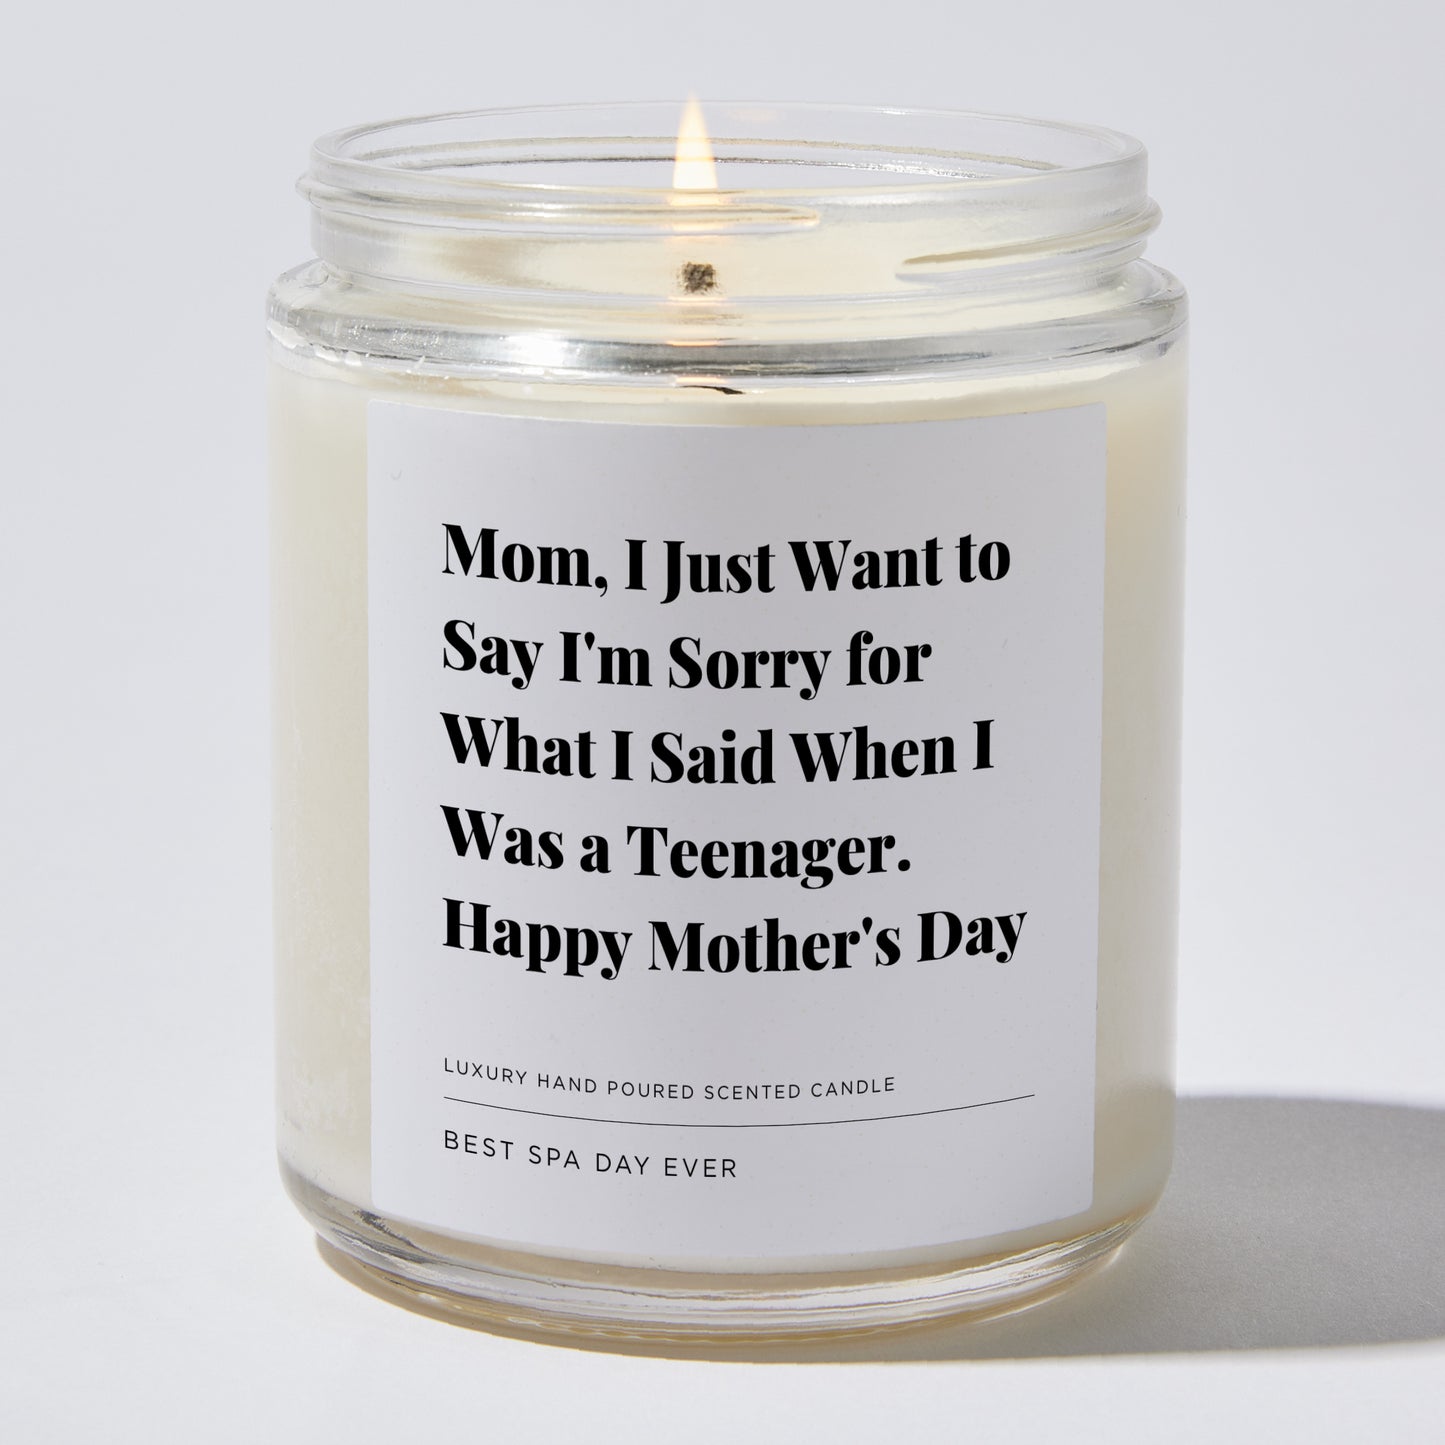 Gift for Mom - Mom, I Just Want to Say I'm Sorry For What I Said When I Was a Teenager. Happy Mother's Day - Candle